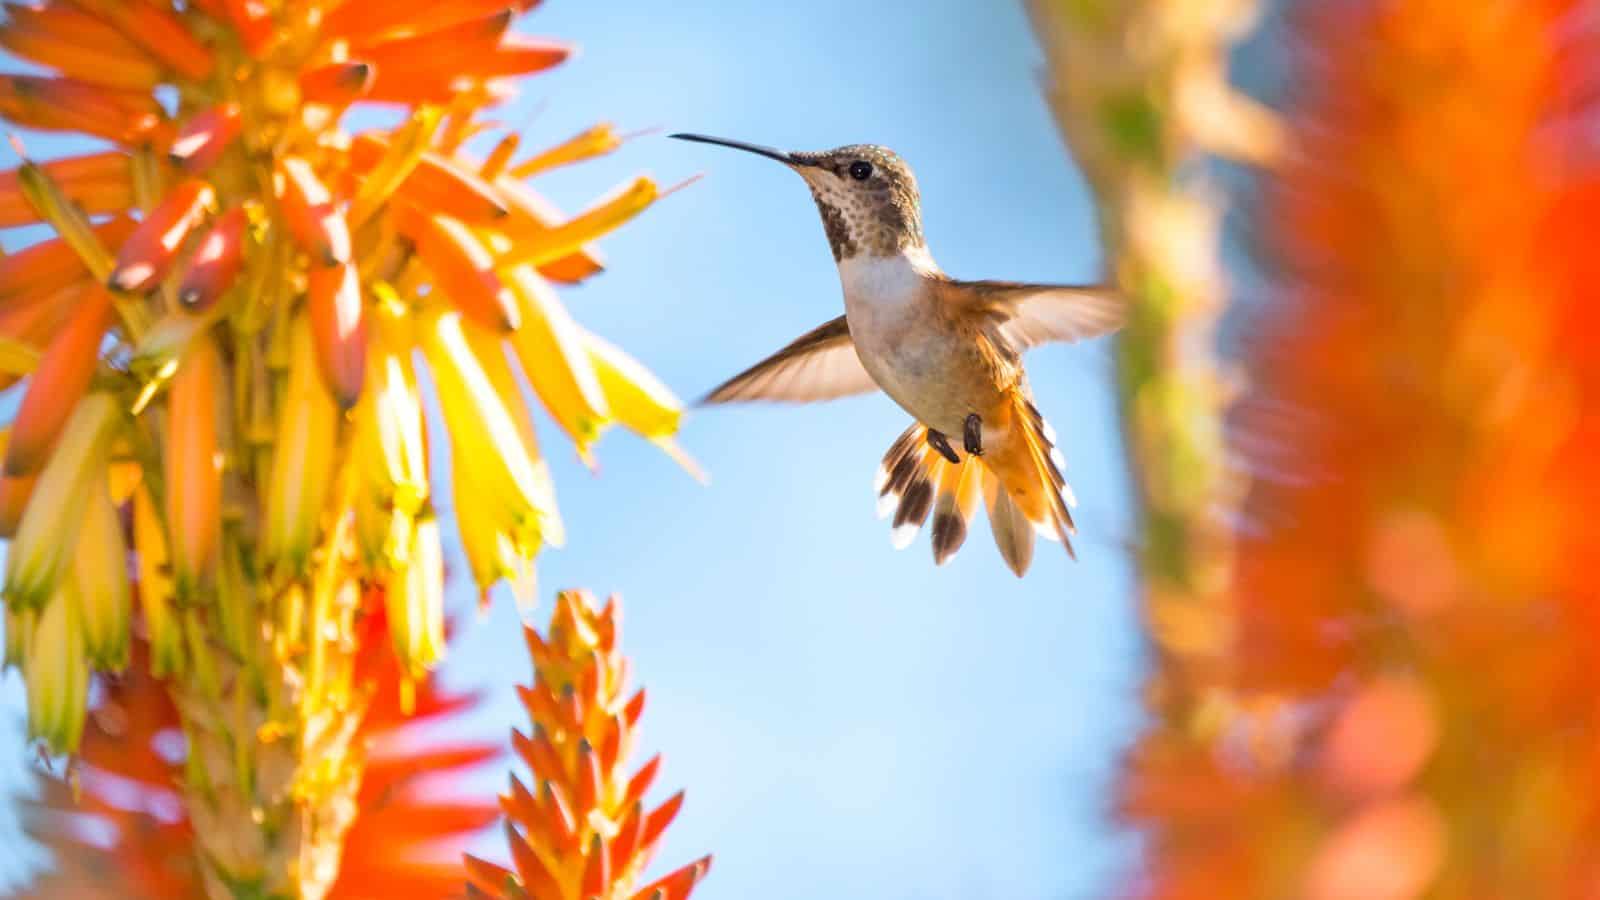 can hummingbirds stop flying